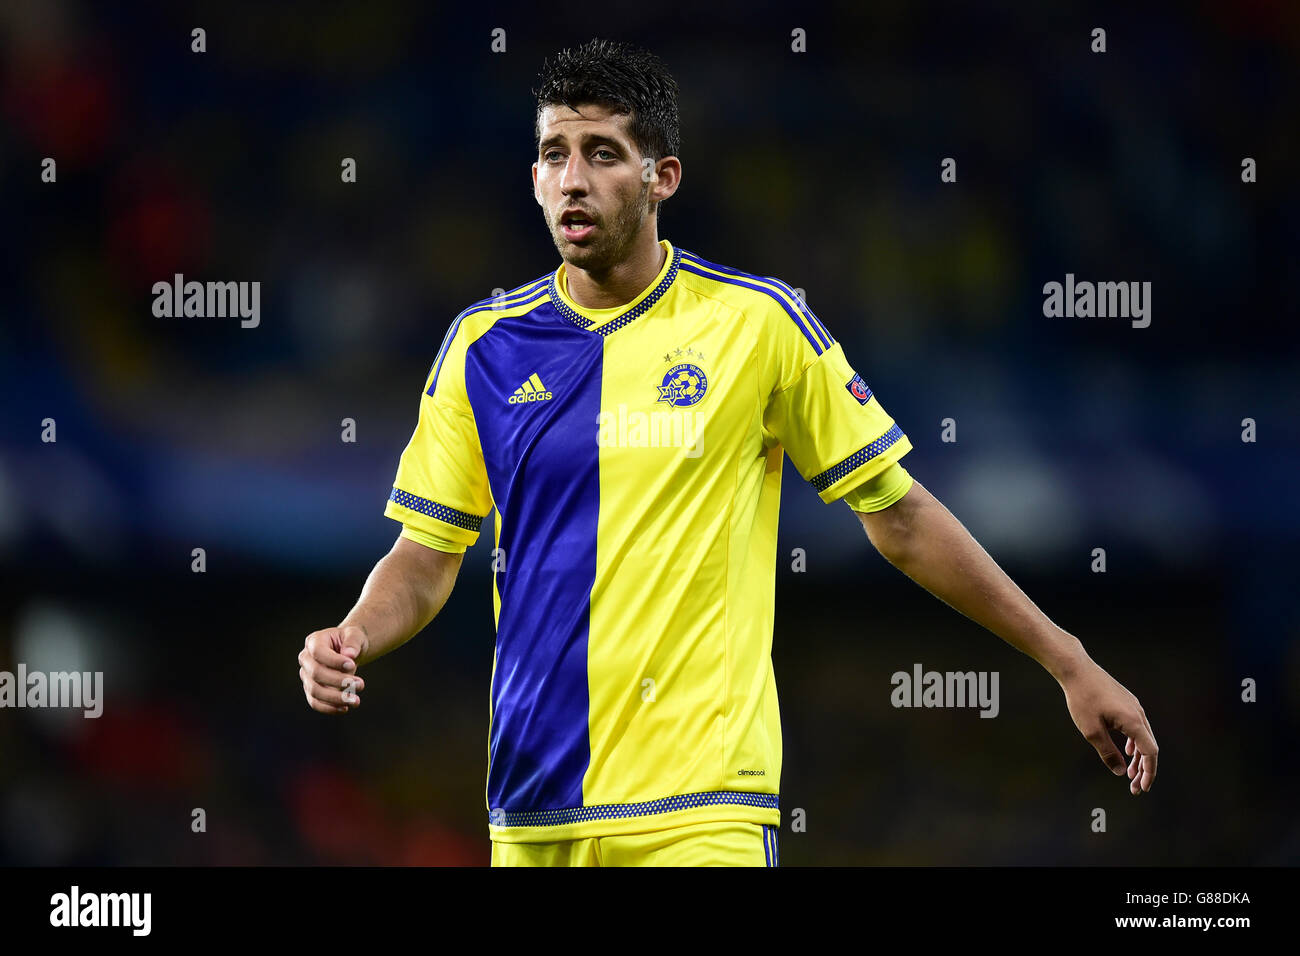 Maccabi Tel Aviv's Dor Micha during the UEFA Champions League match at Stamford Bridge, London. PRESS ASSOCIATION Photo. Picture date: Wednesday September 16, 2015. See PA story SOCCER Chelsea. Photo credit for should read: Adam Davy/PA Wire. Stock Photo